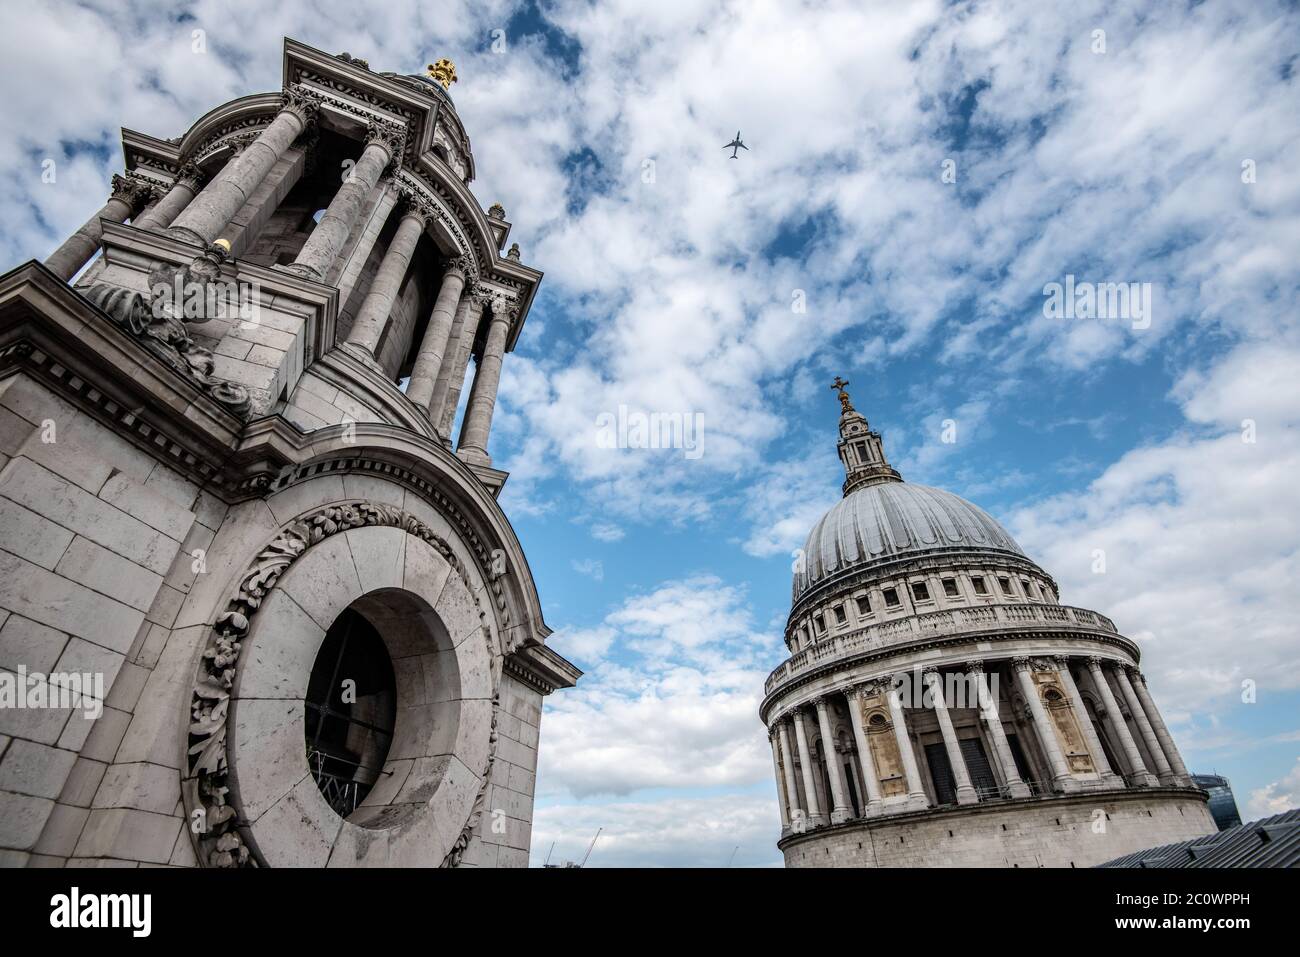 St Paul's Cathedral, London, England. One of the clock towers (left). Stock Photo